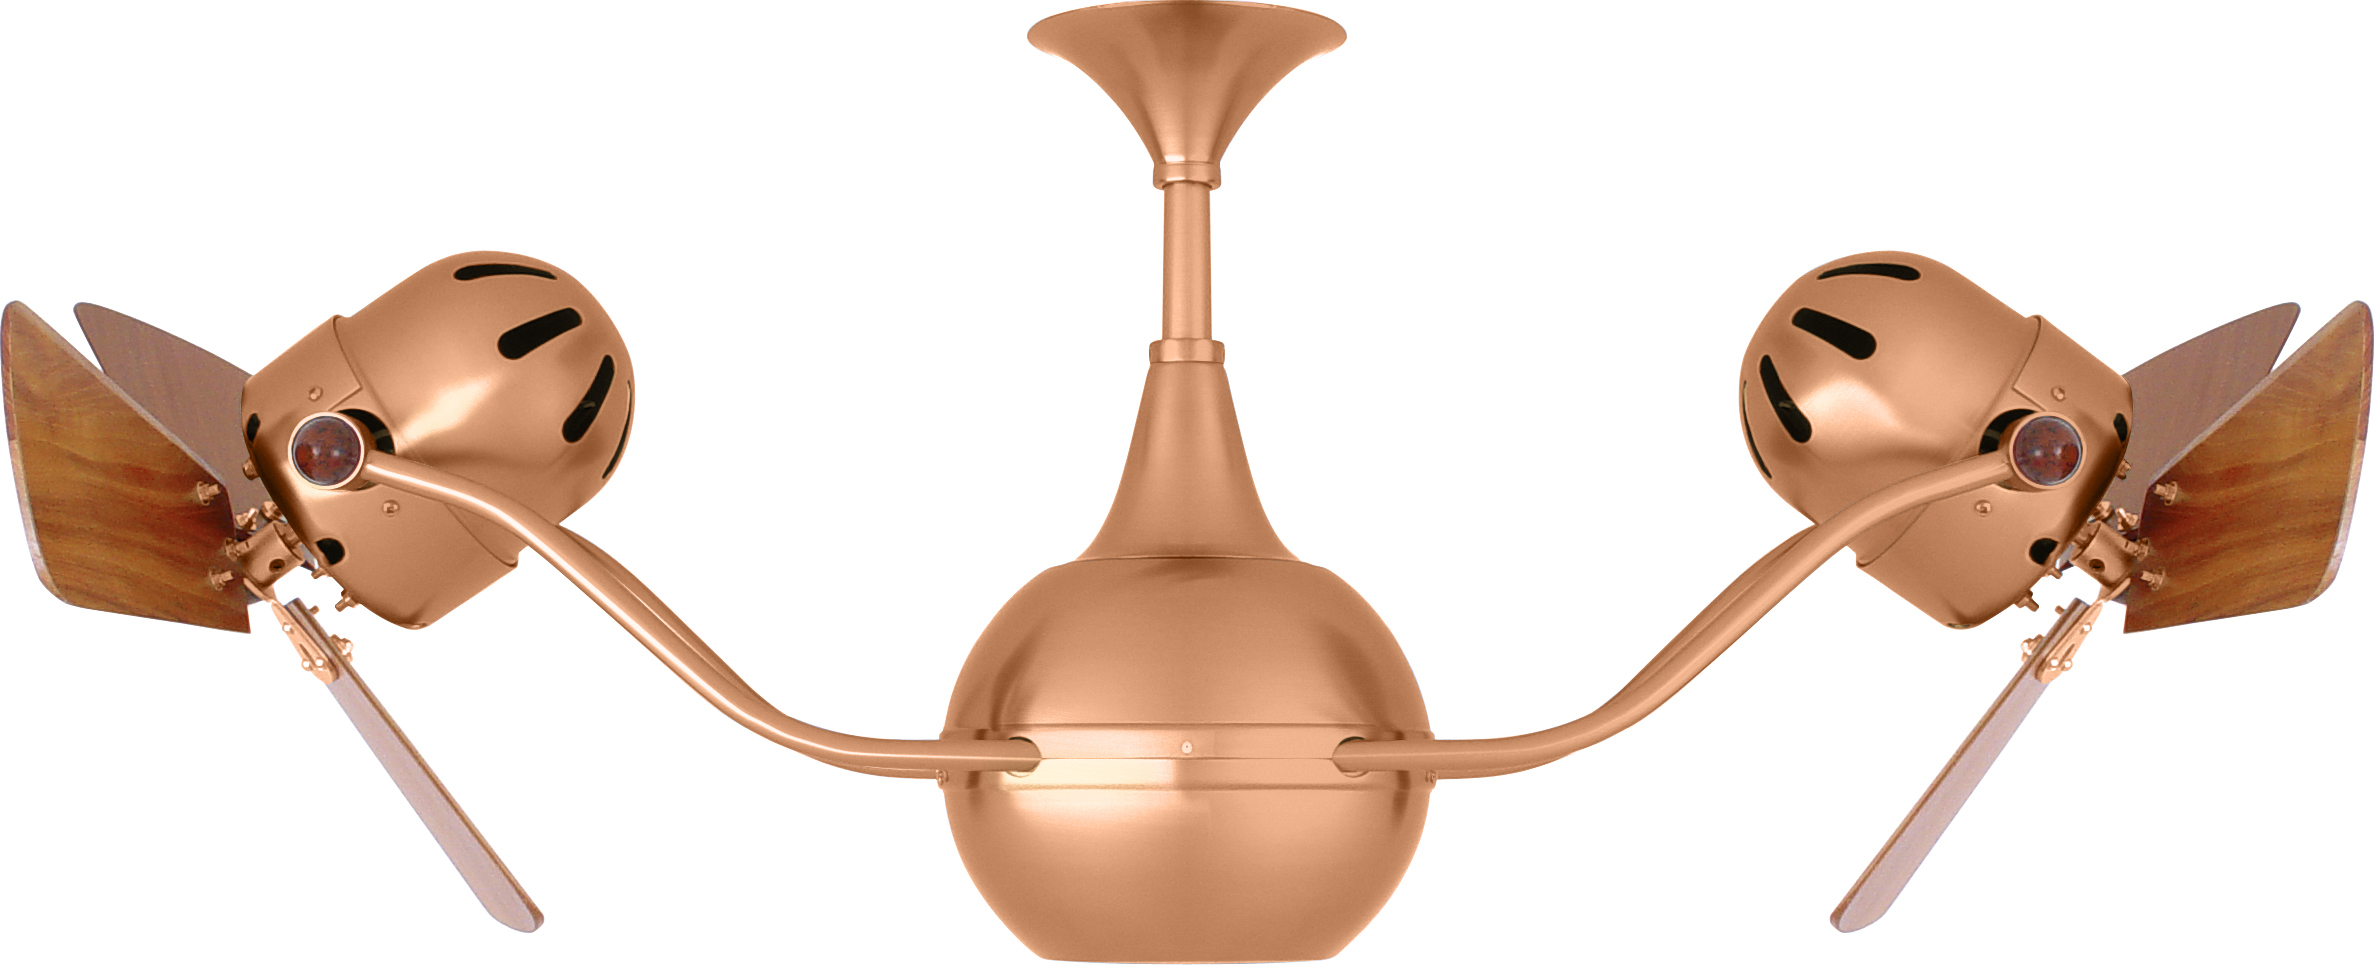 Vent-Bettina rotational dual head ceiling fan in Brushed Copper finish with Mahogany wood blades made by Matthews Fan Company.